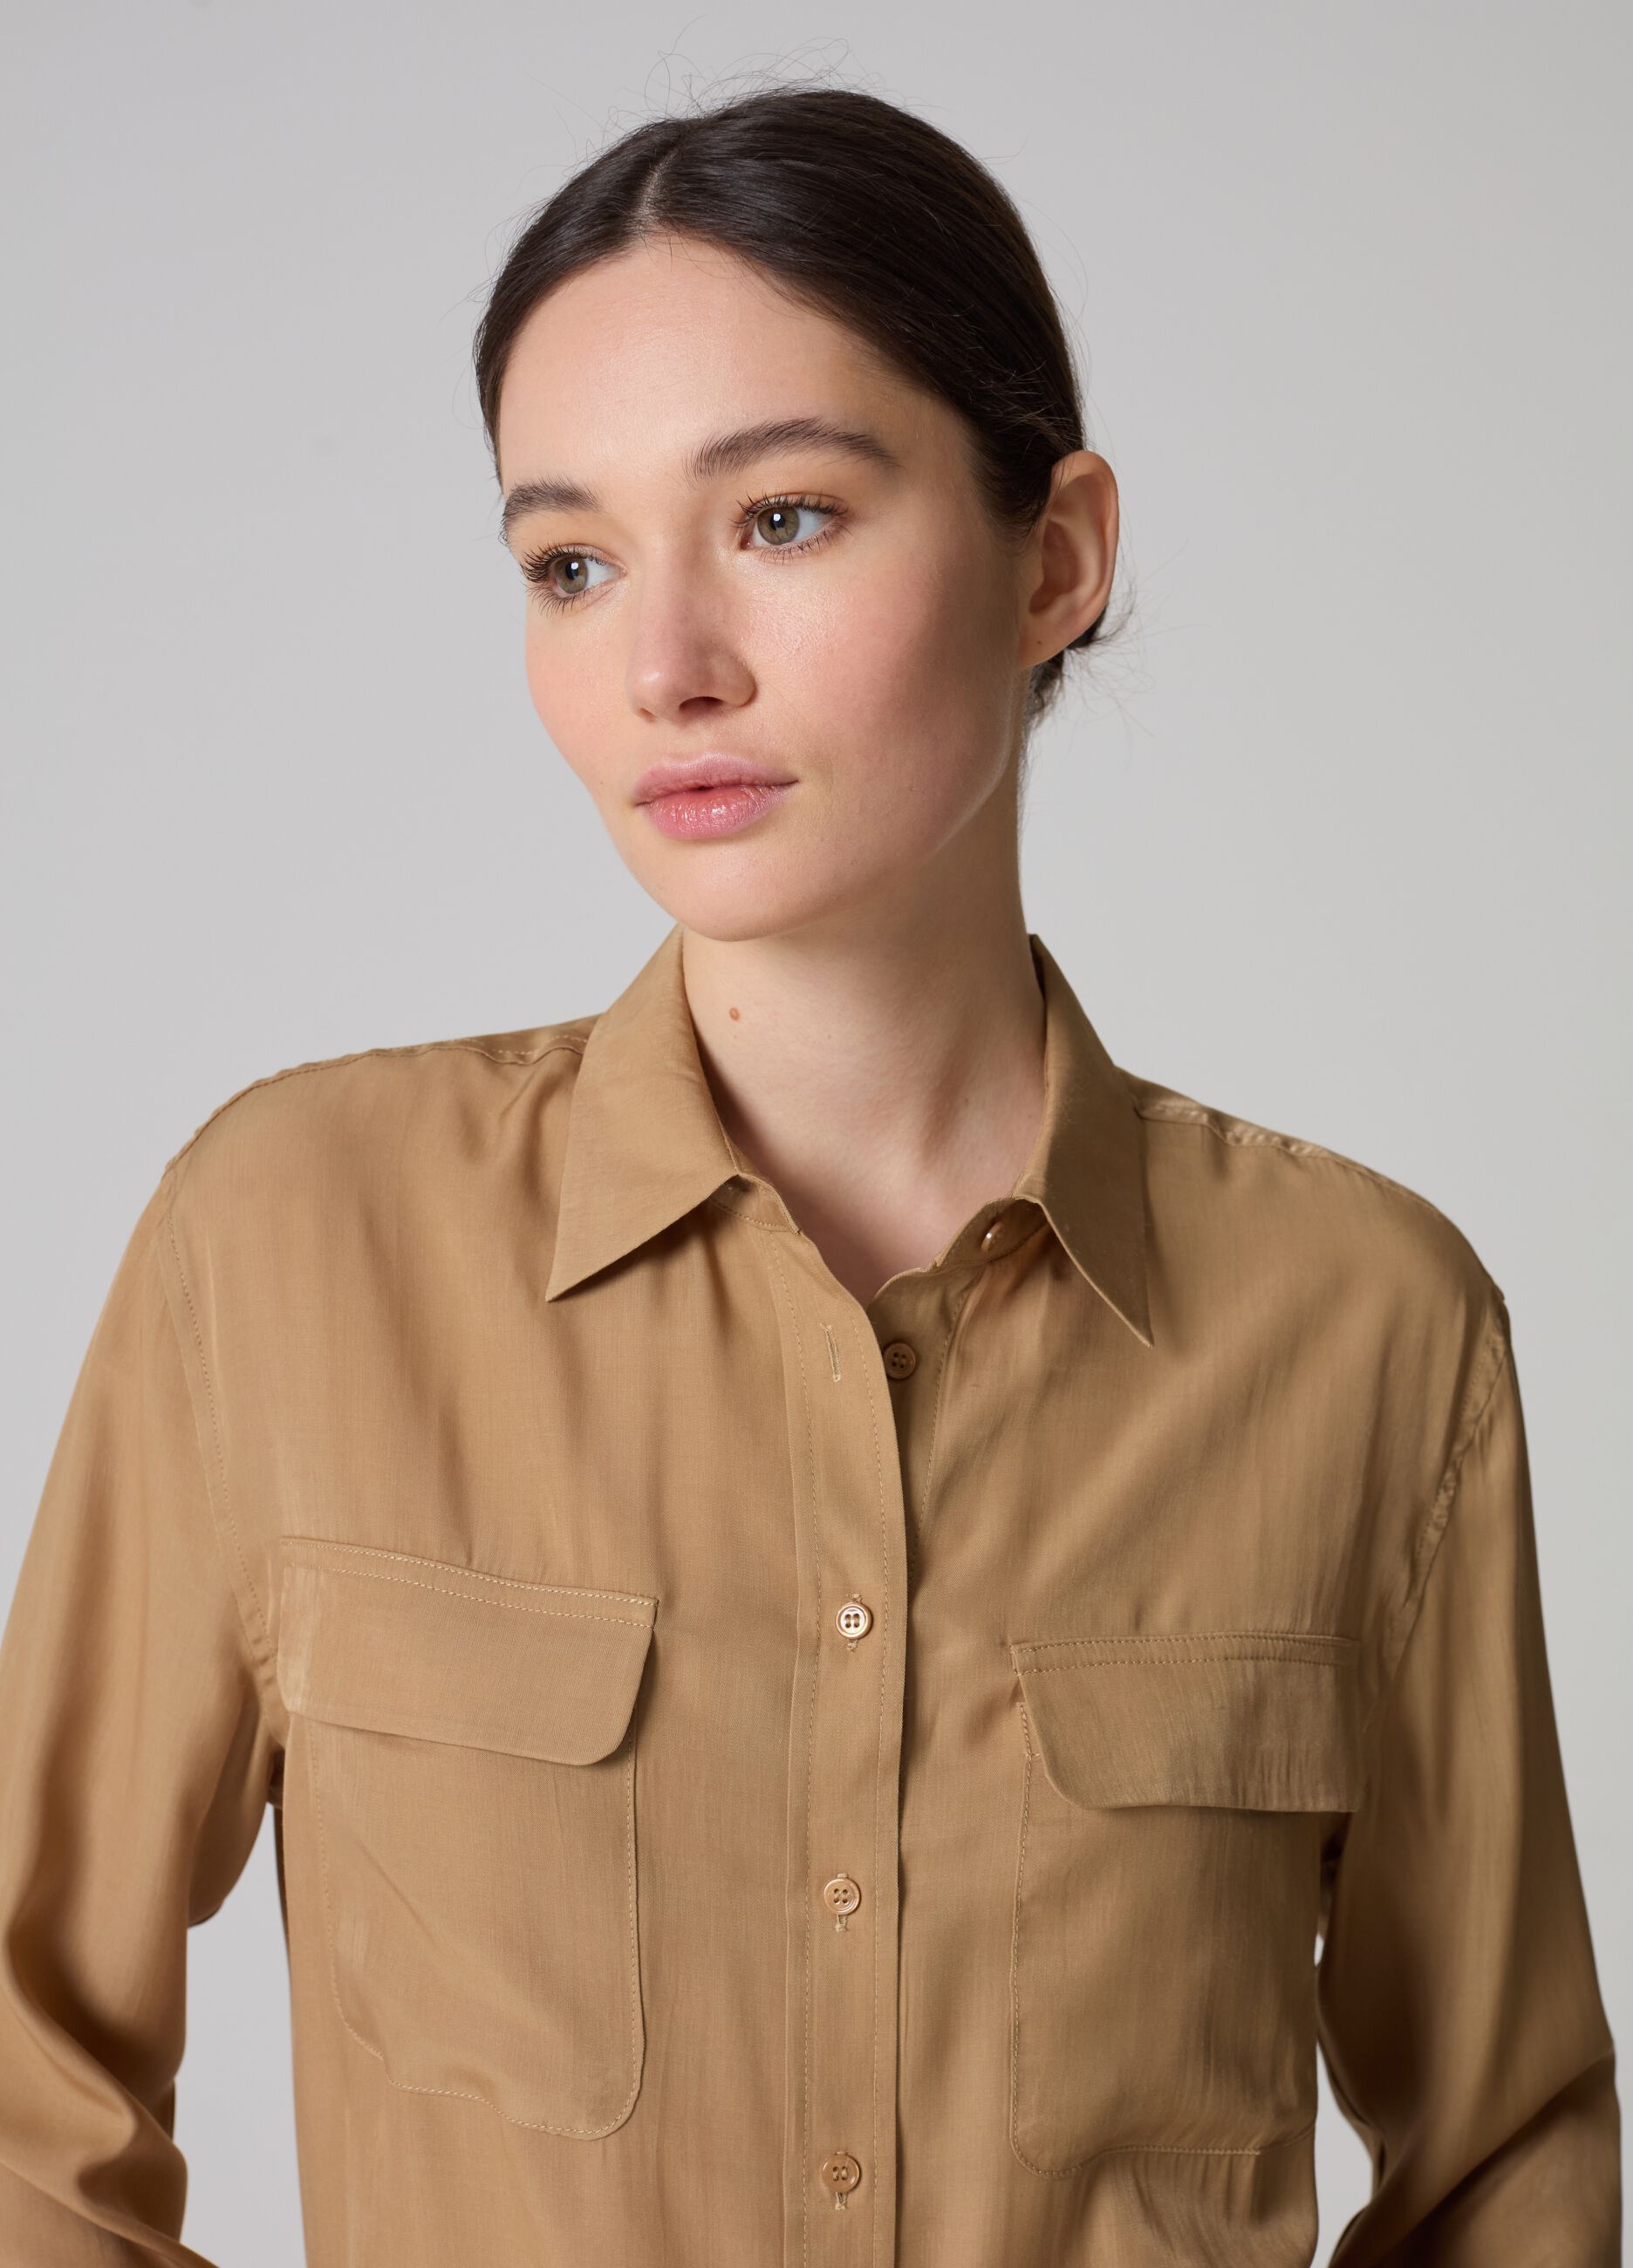 Contemporary relaxed-fit shirt in satin